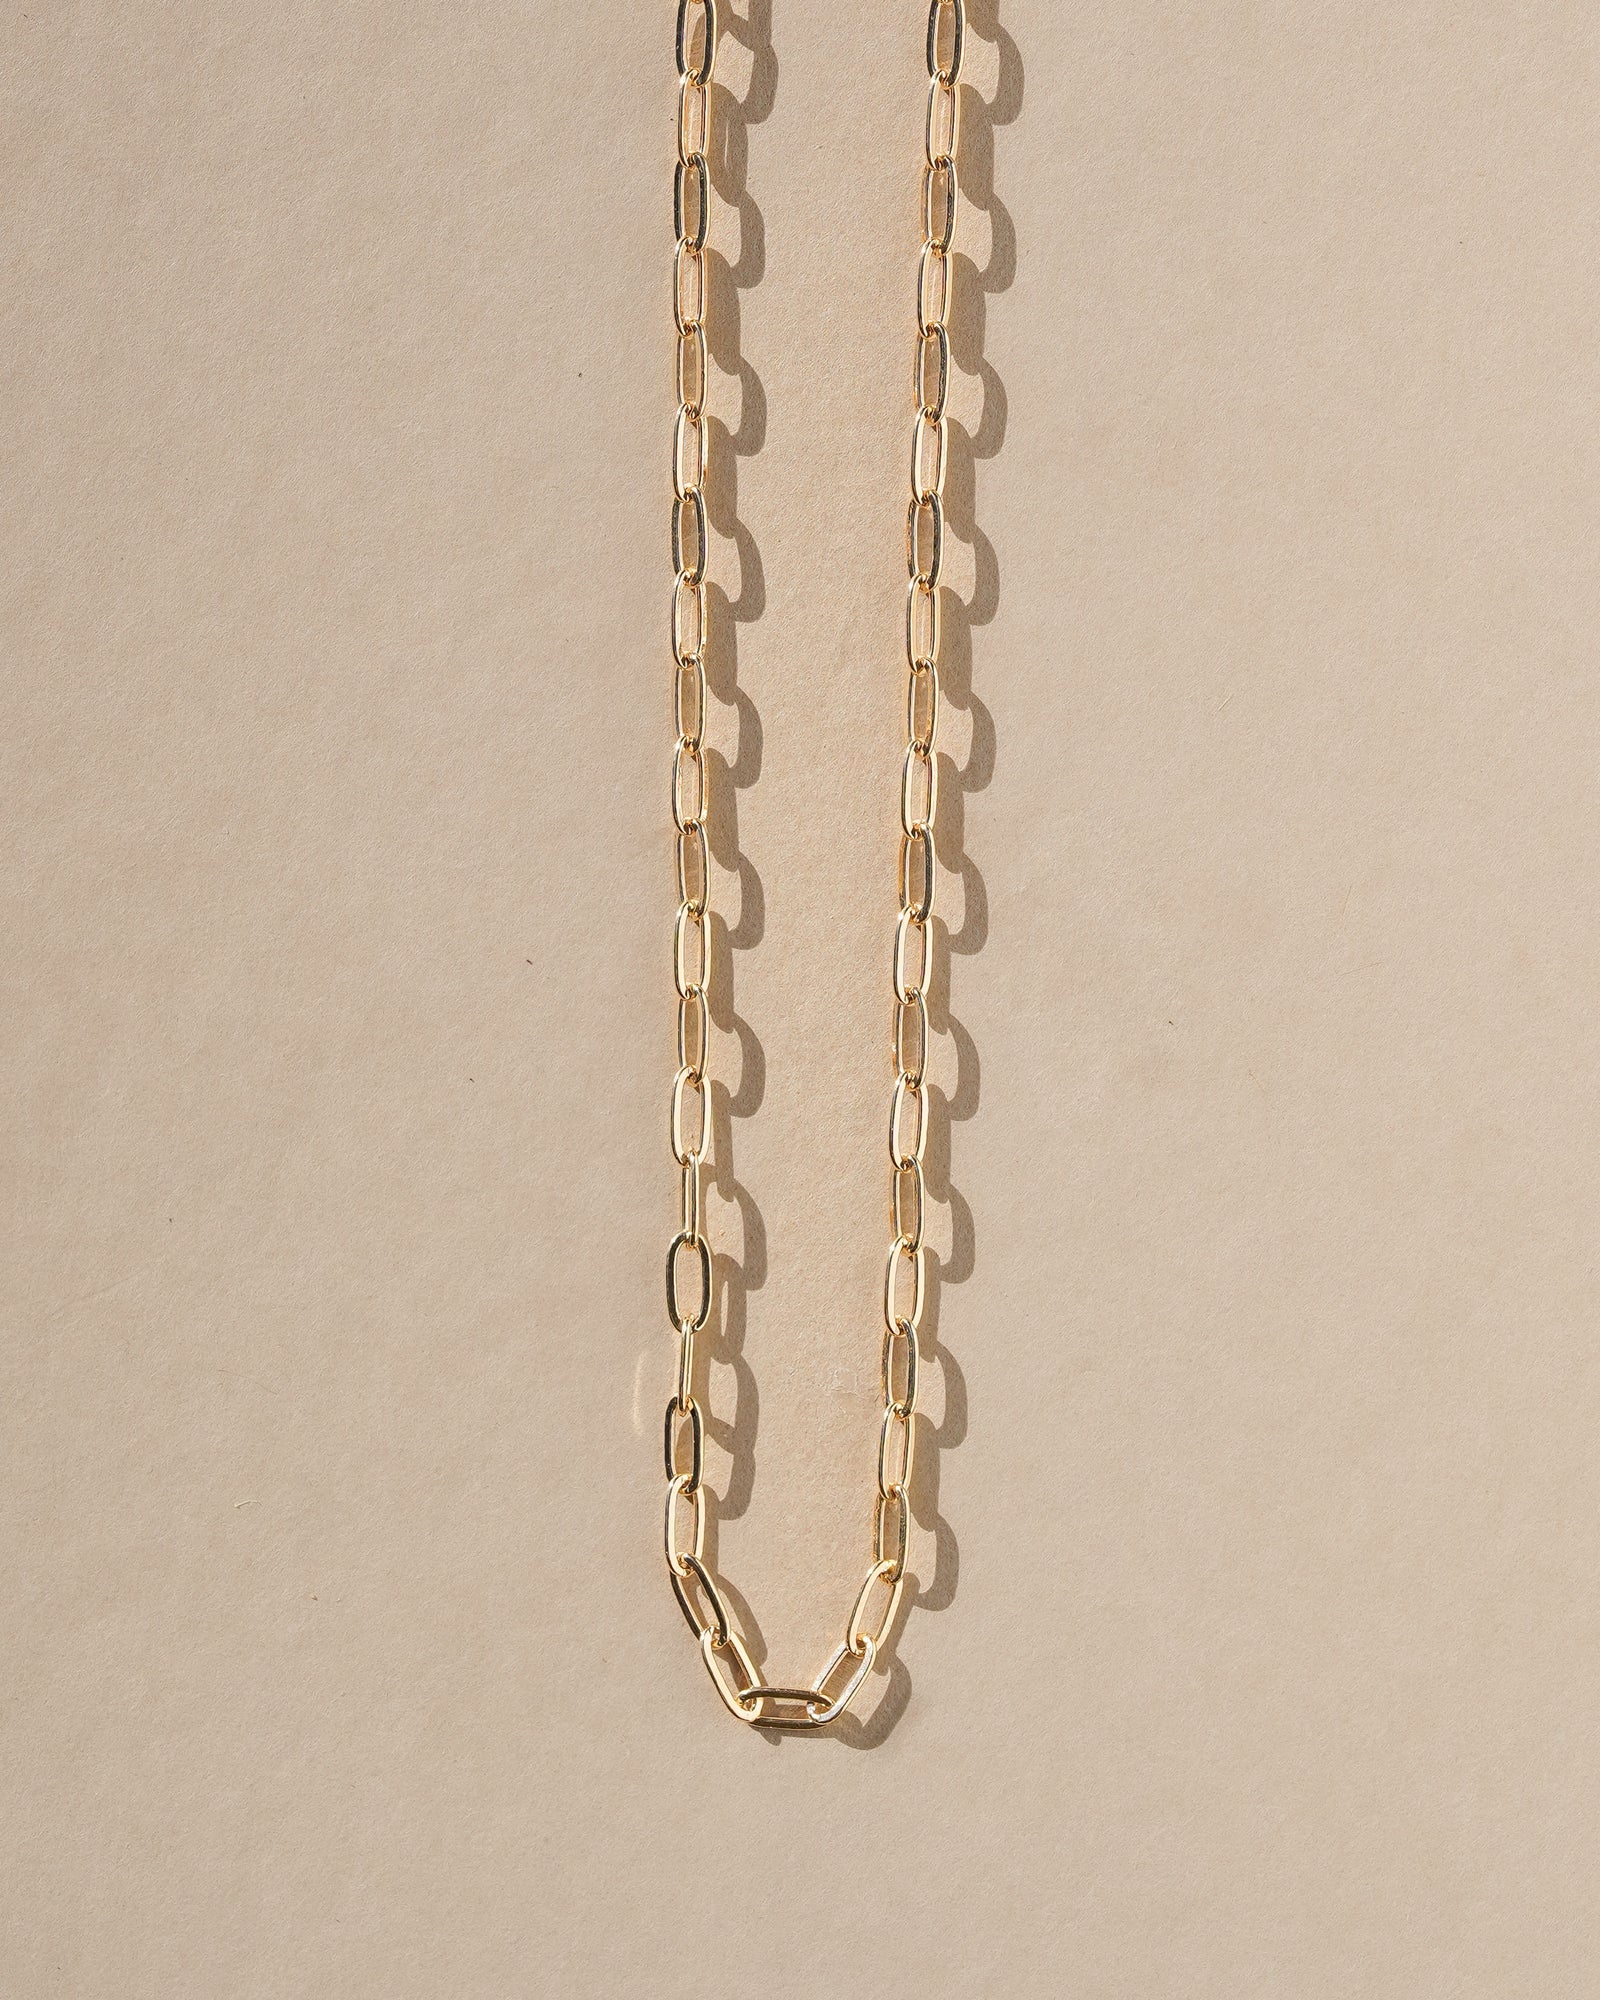 The Allora necklace - with interlocking soft oval links that sit elegantly along the neckline. As an ode to love that never parts, the links are designed to resemble the infinity symbol. Wear it solo or layered with other necklaces in this collection. Handmade in the Santa Cruz Mountains.